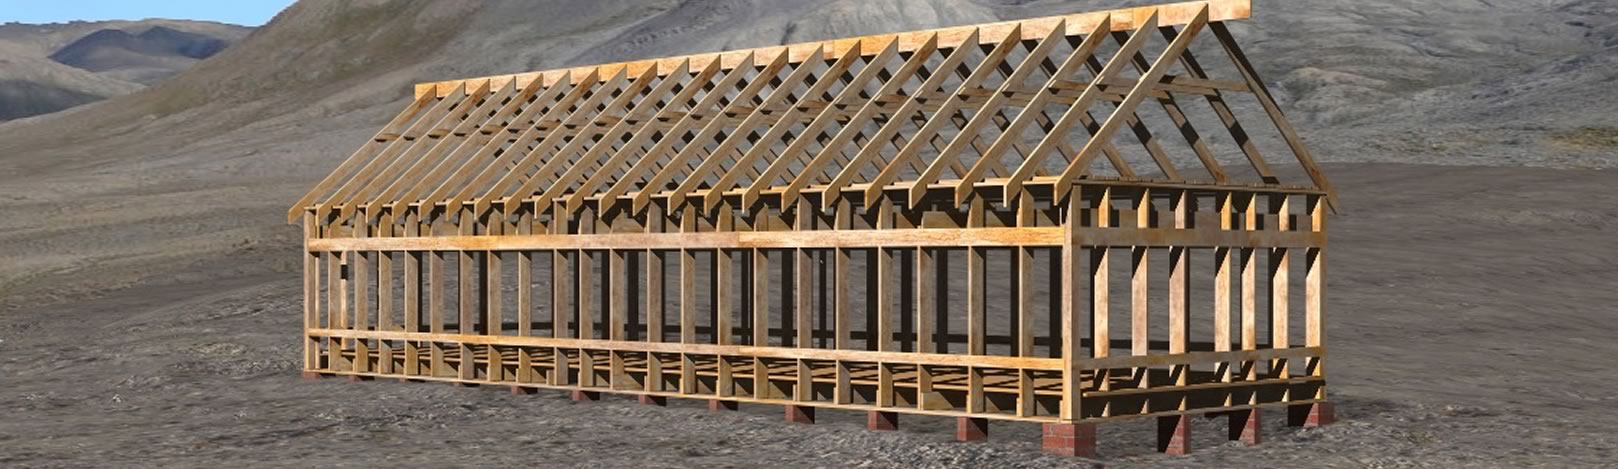 Virtual reconstruction of the same historic photograph. The completed house frame with roof is depicted against a backdrop of brown/grey hills and gullies.